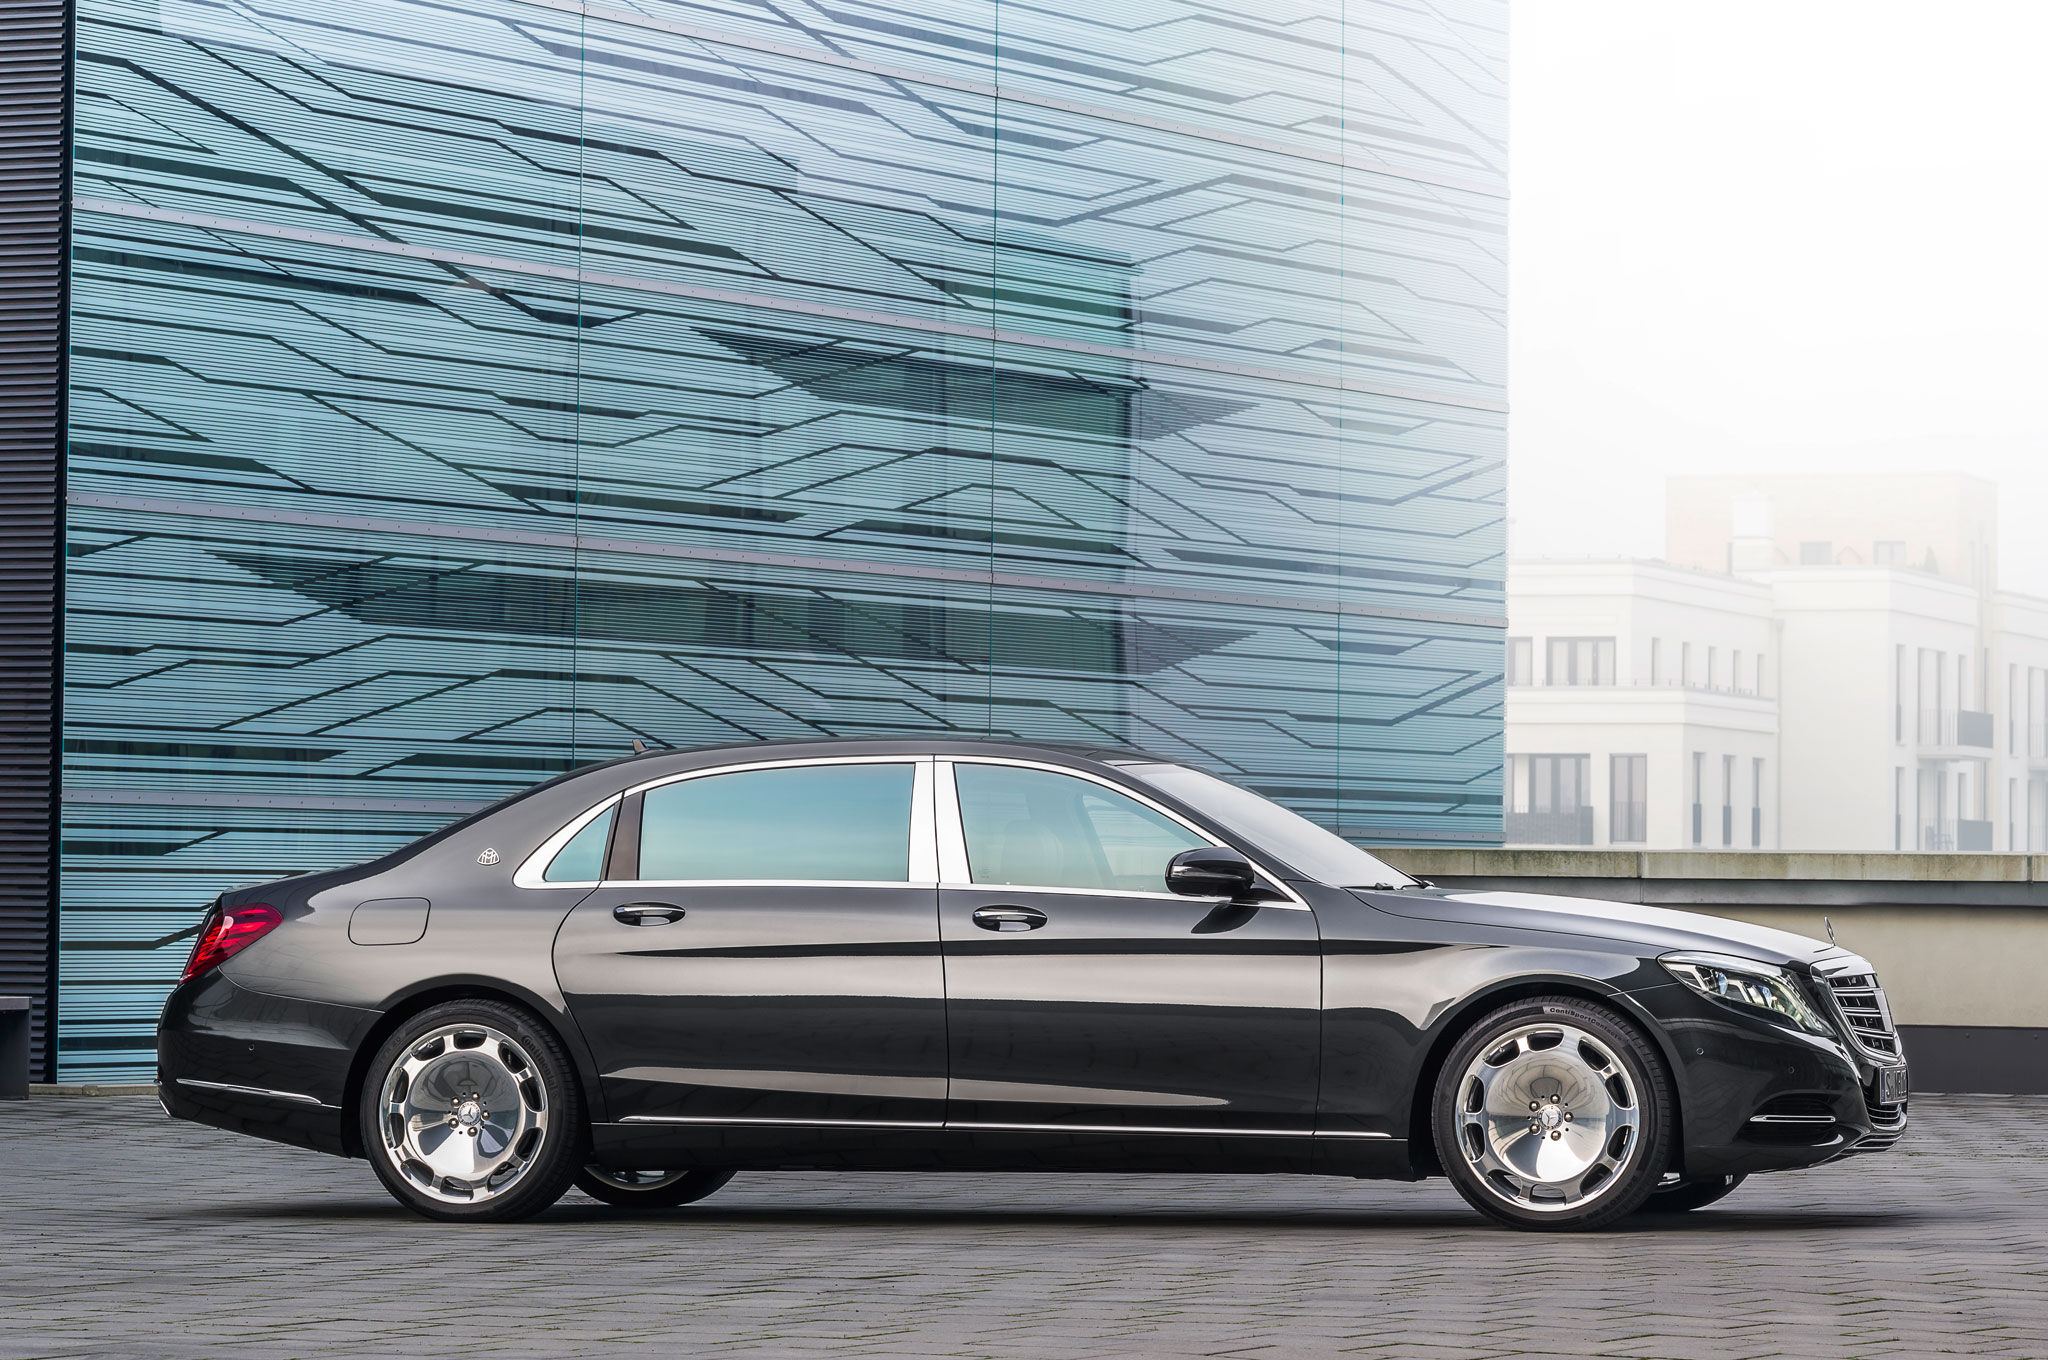 Overdrive: Mercedes-Maybach S600 is a luxurious powerhouse